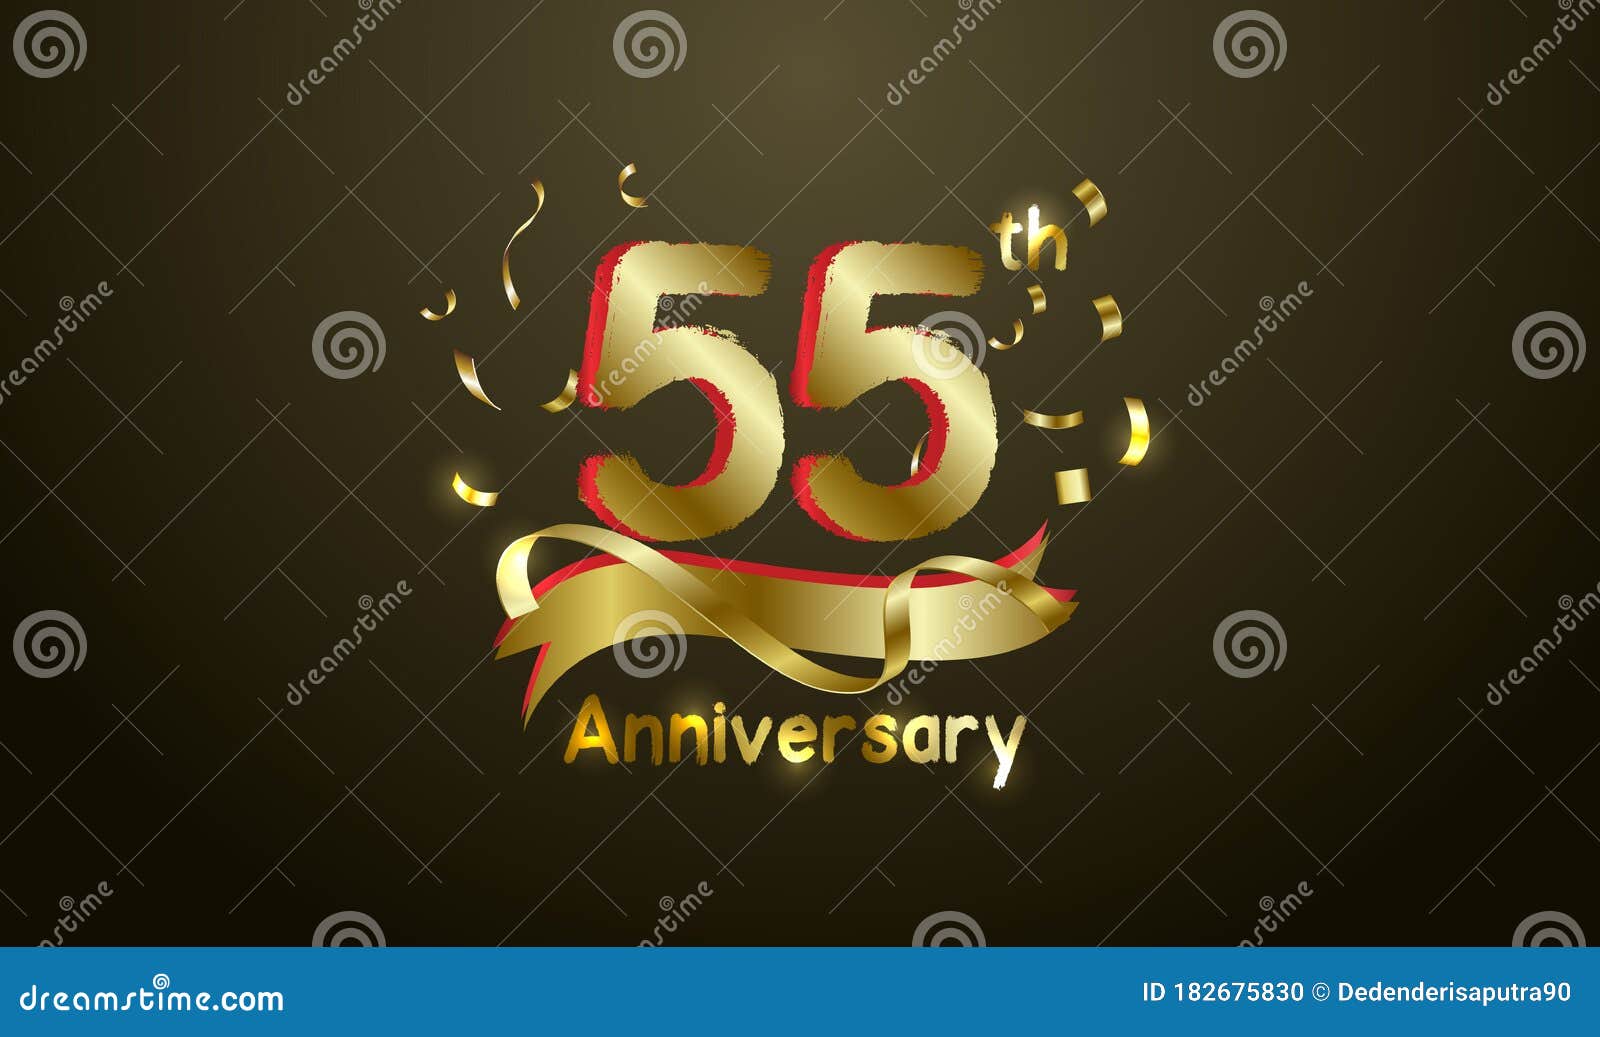 Anniversary Celebration Background. with the 55th Number in Gold and ...